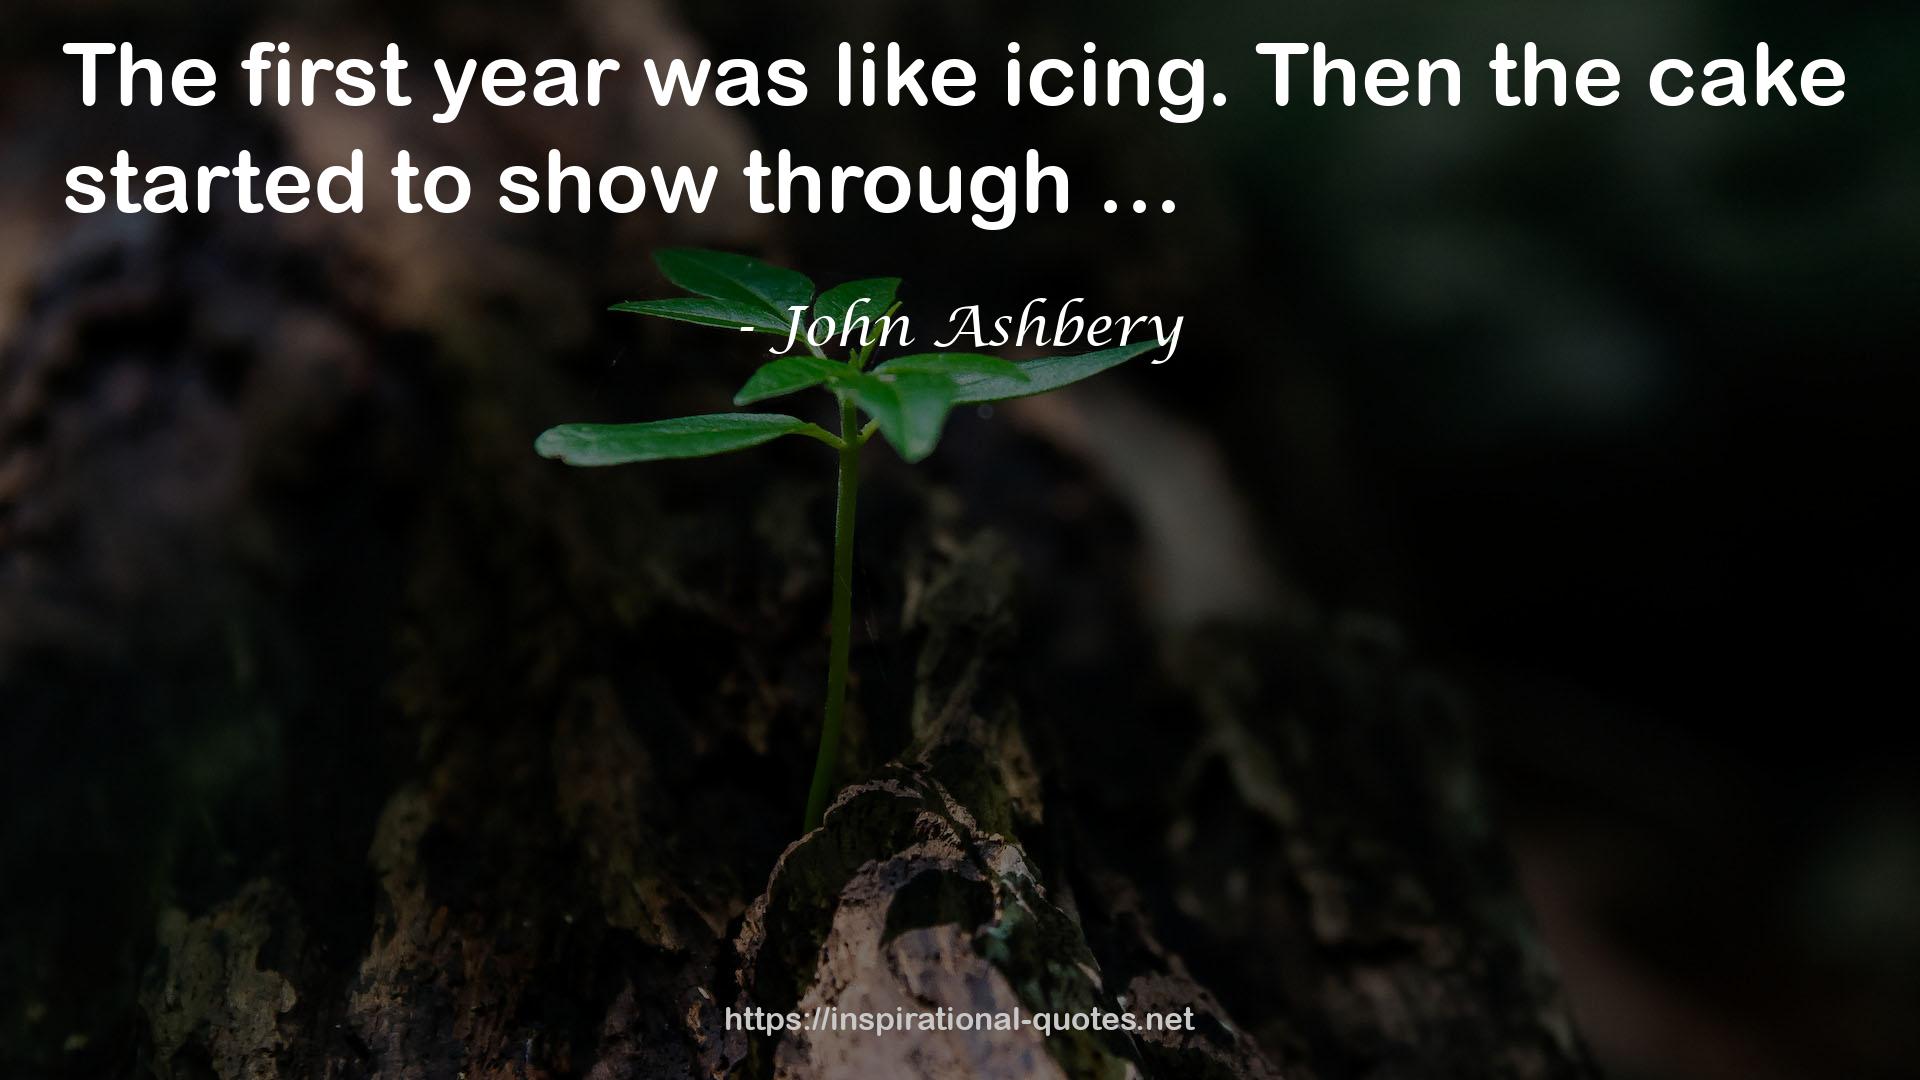 John Ashbery QUOTES